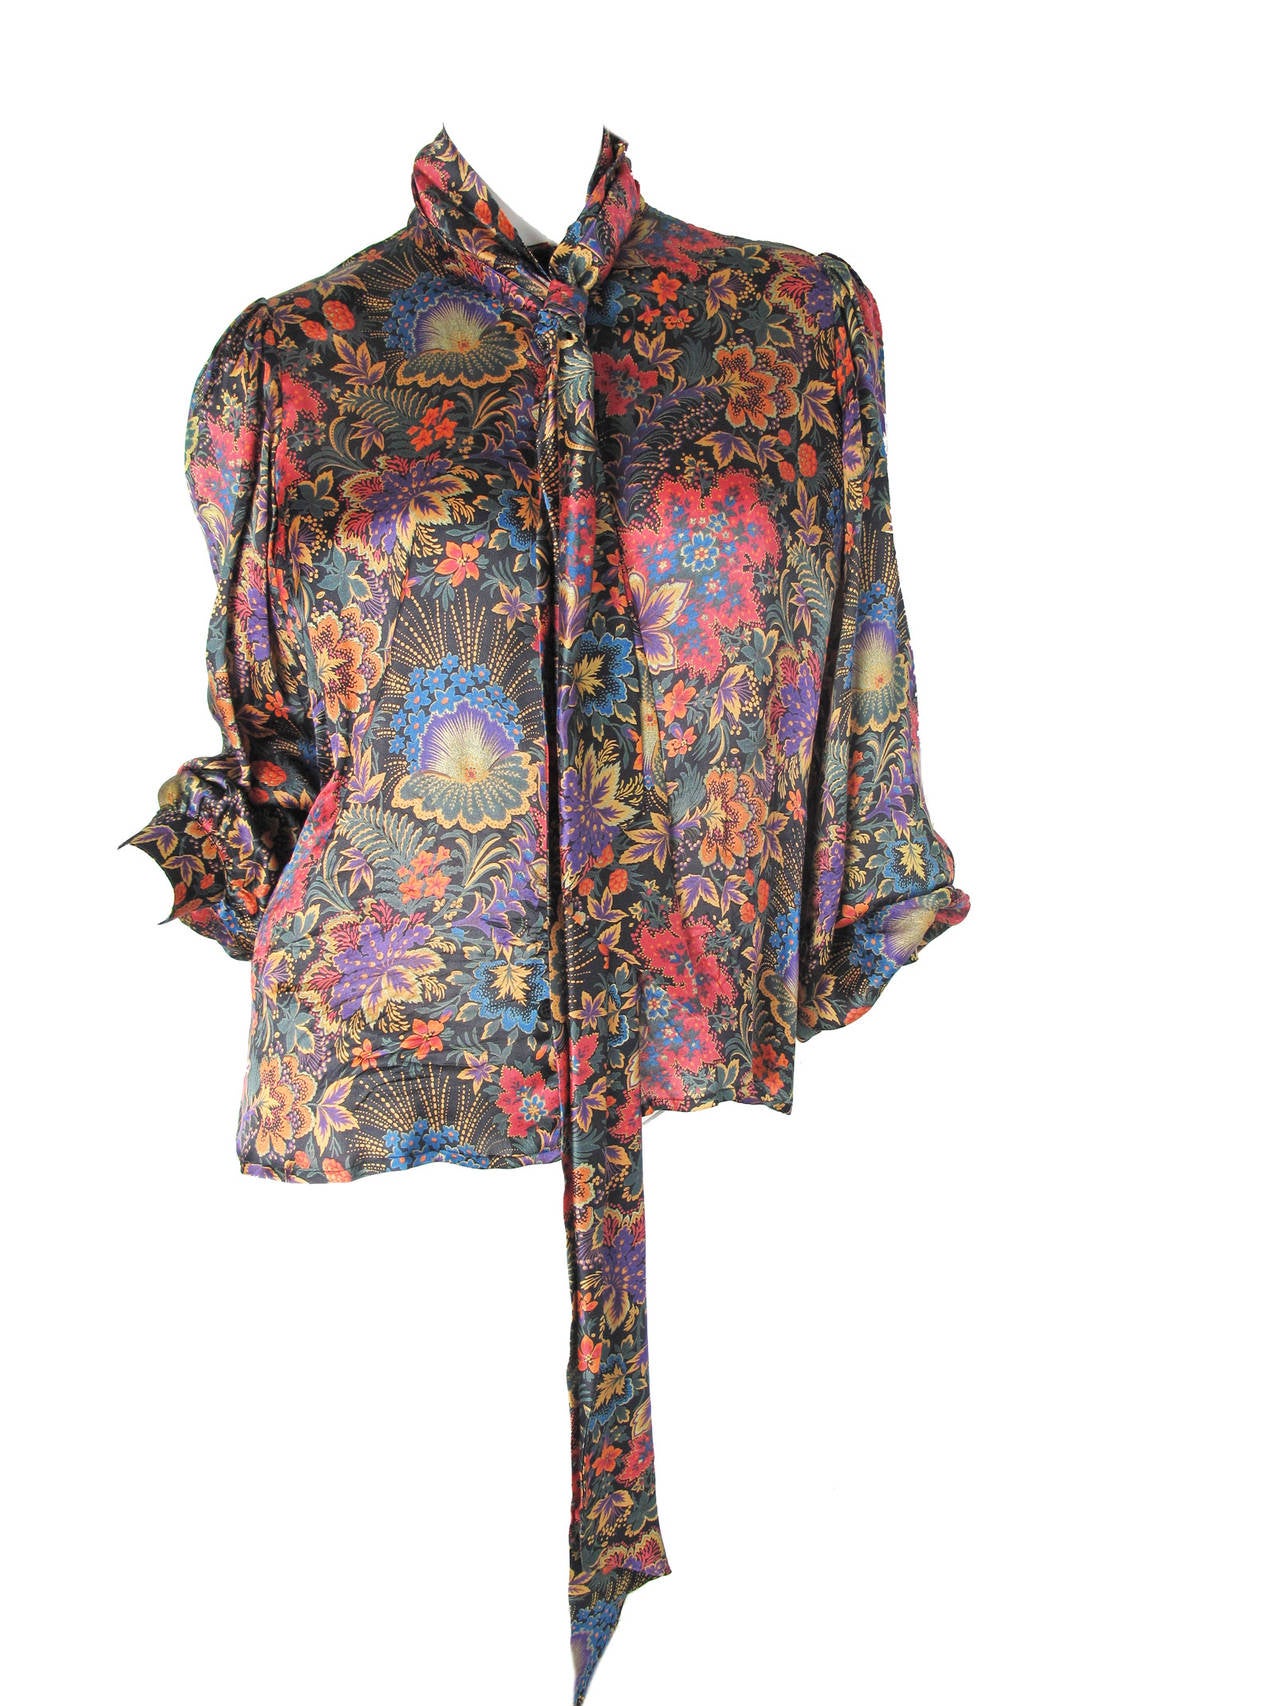 UNGARO silk blouse with neck tie and separate waist belt.  38